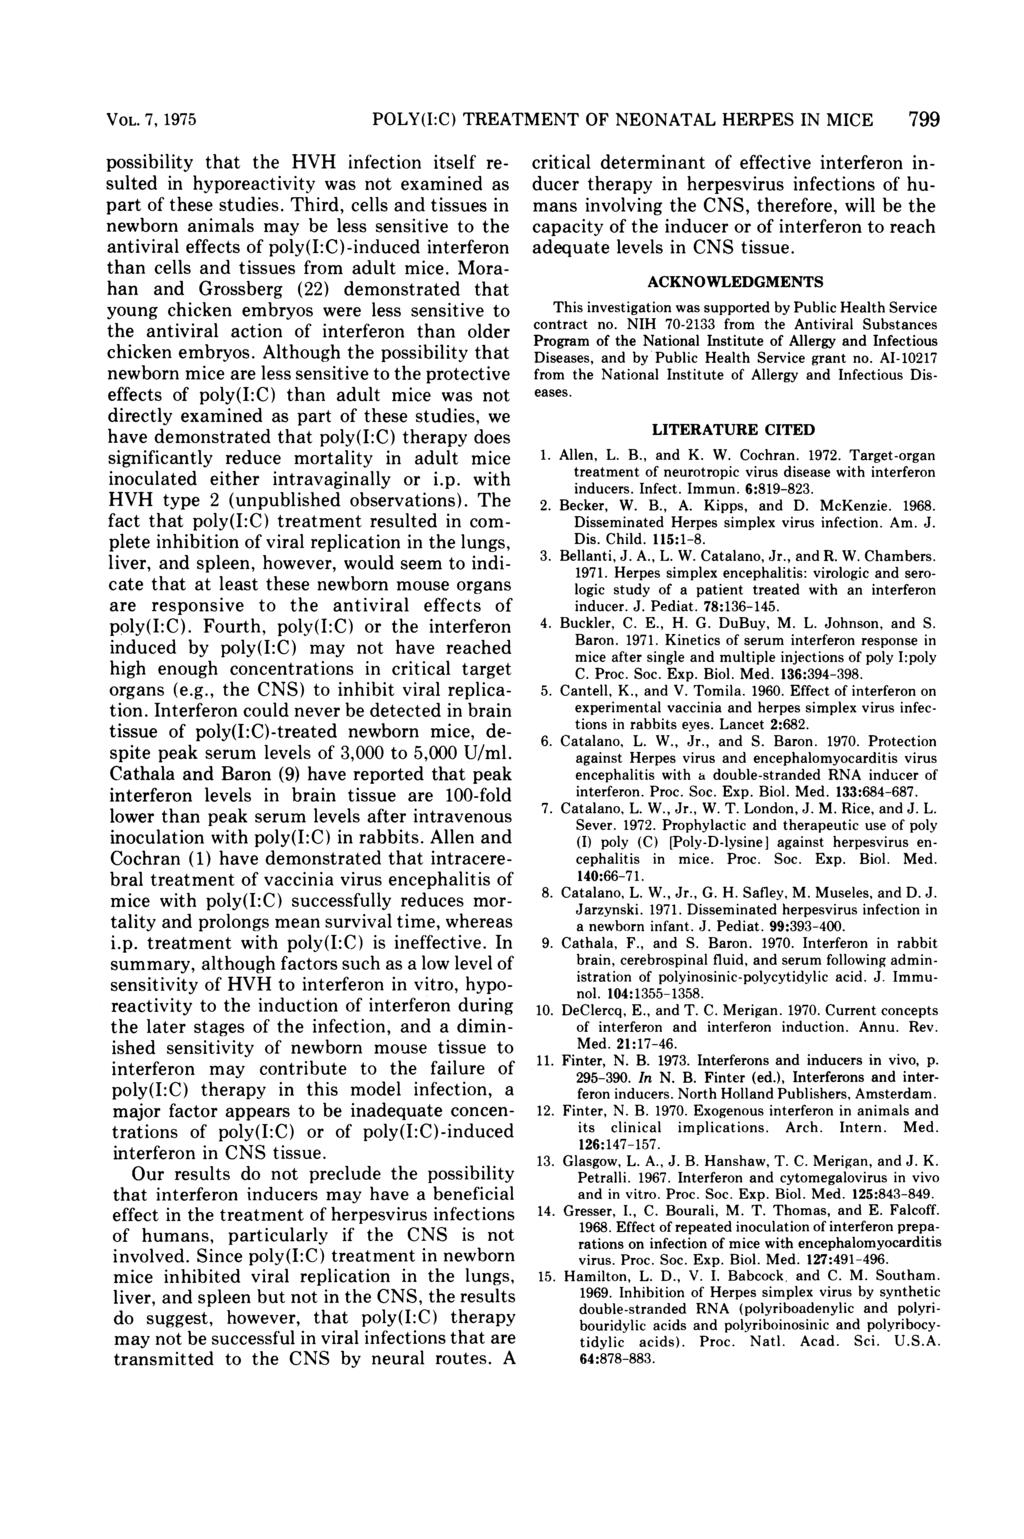 VOL. 7, 1975 possibility that the HVH infection itself resulted in hyporeactivity was not examined as part of these studies.